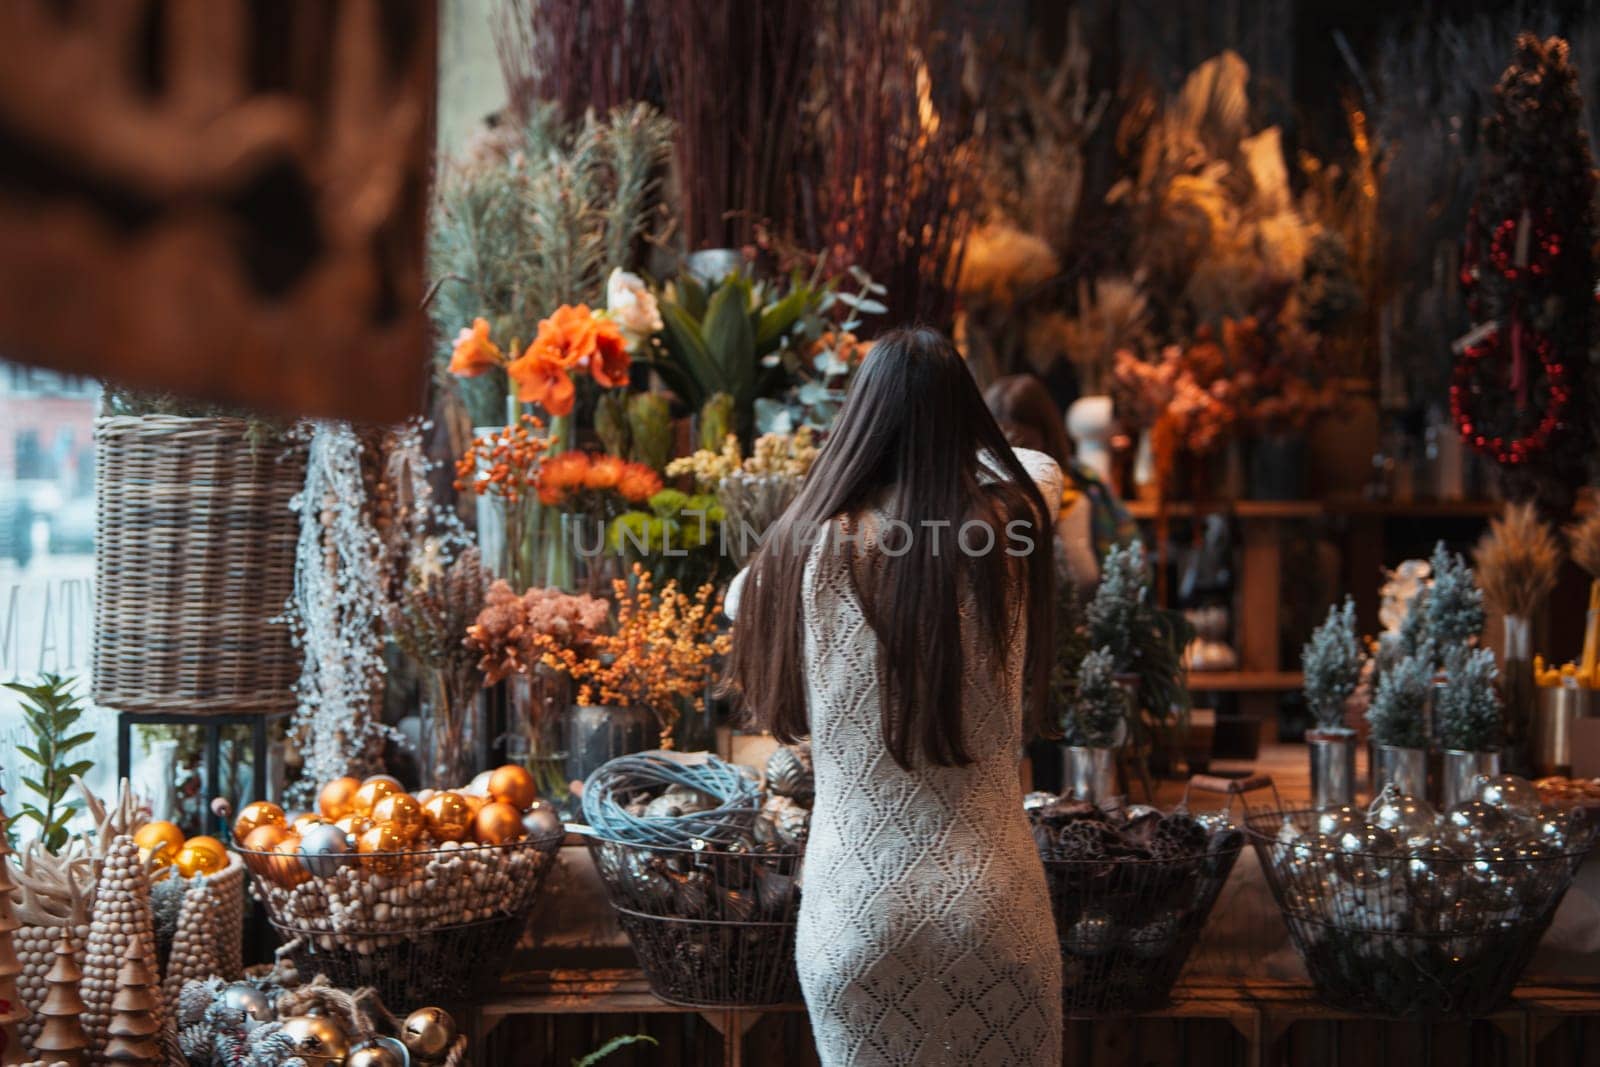 Explore the diverse New Year decor offerings at the decor store. by teksomolika